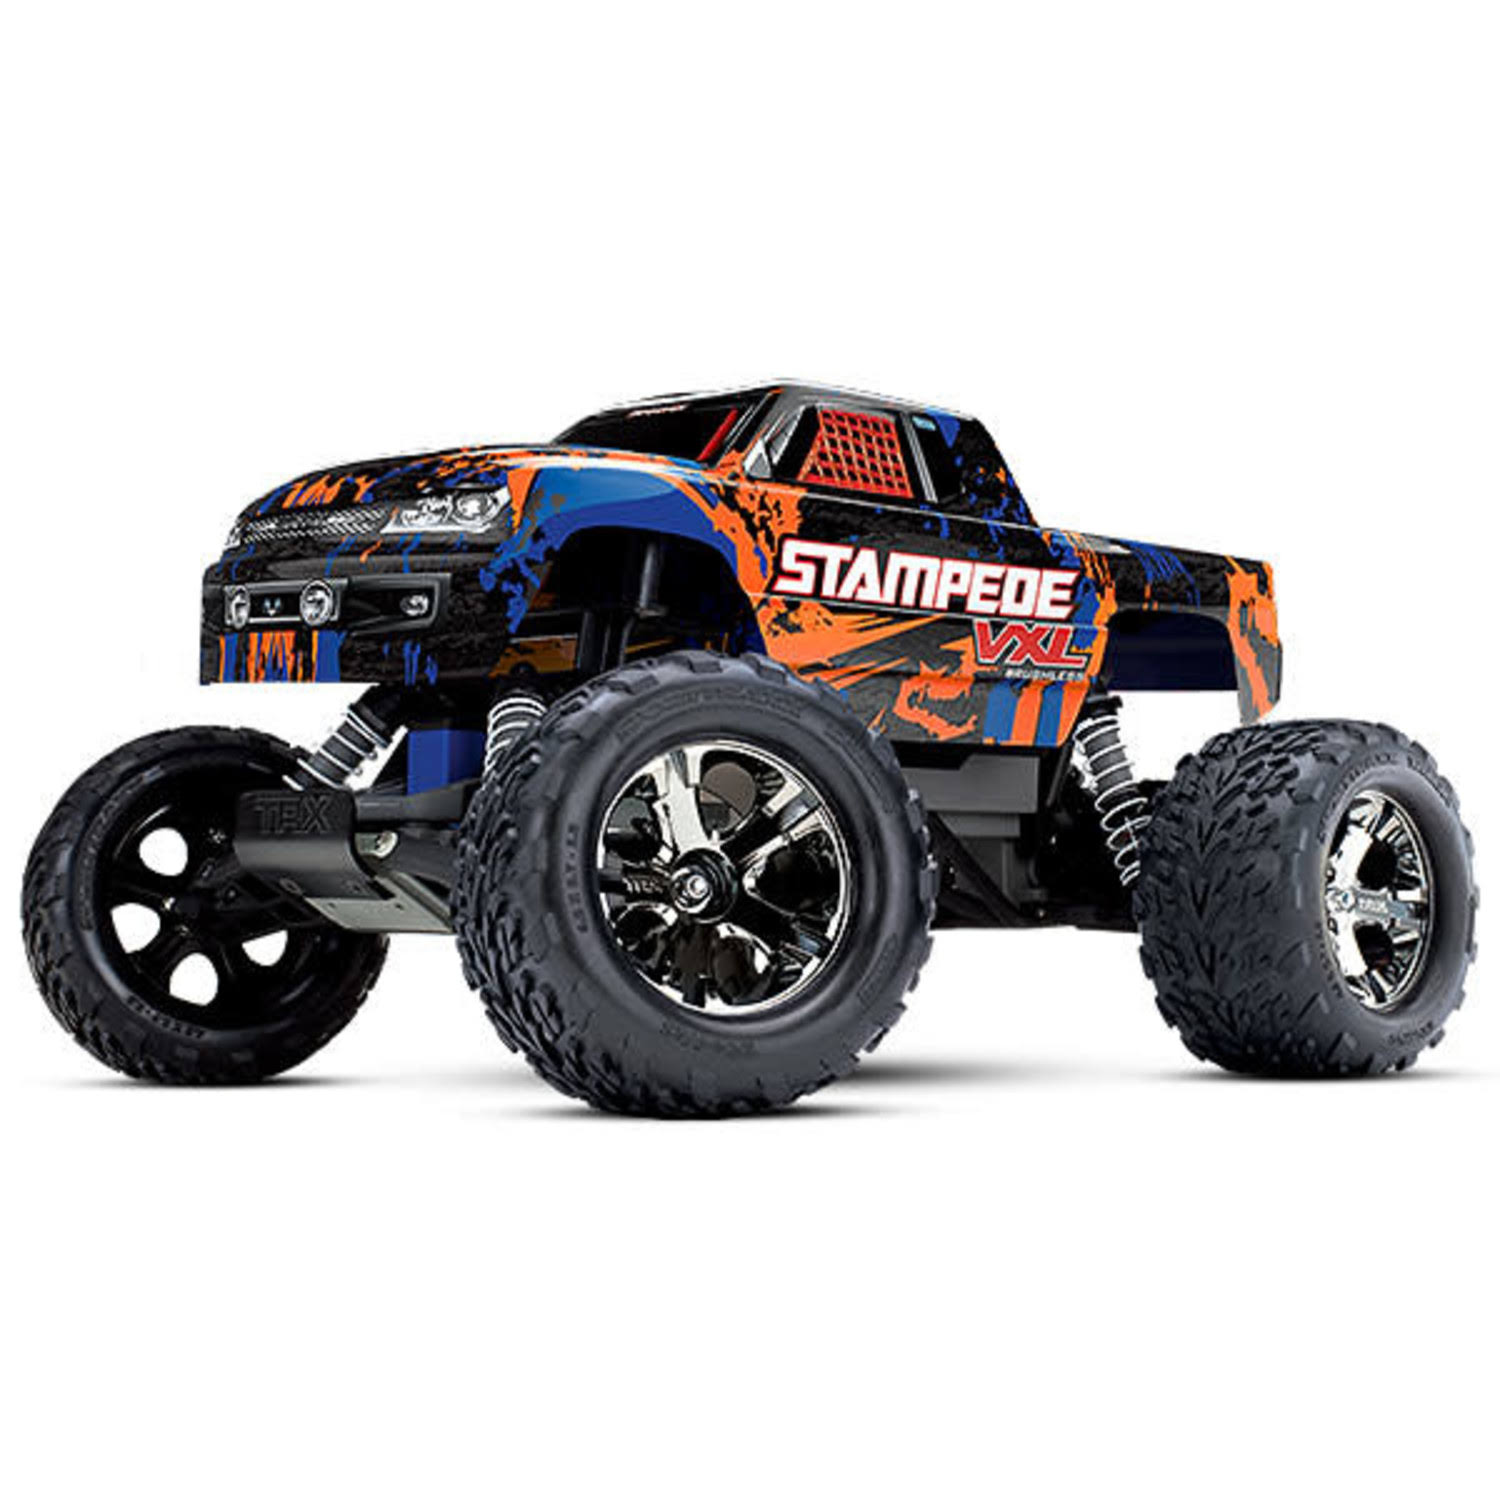 Traxxas 360764ORNG Stampede VXL: 1/10 Scale Monster